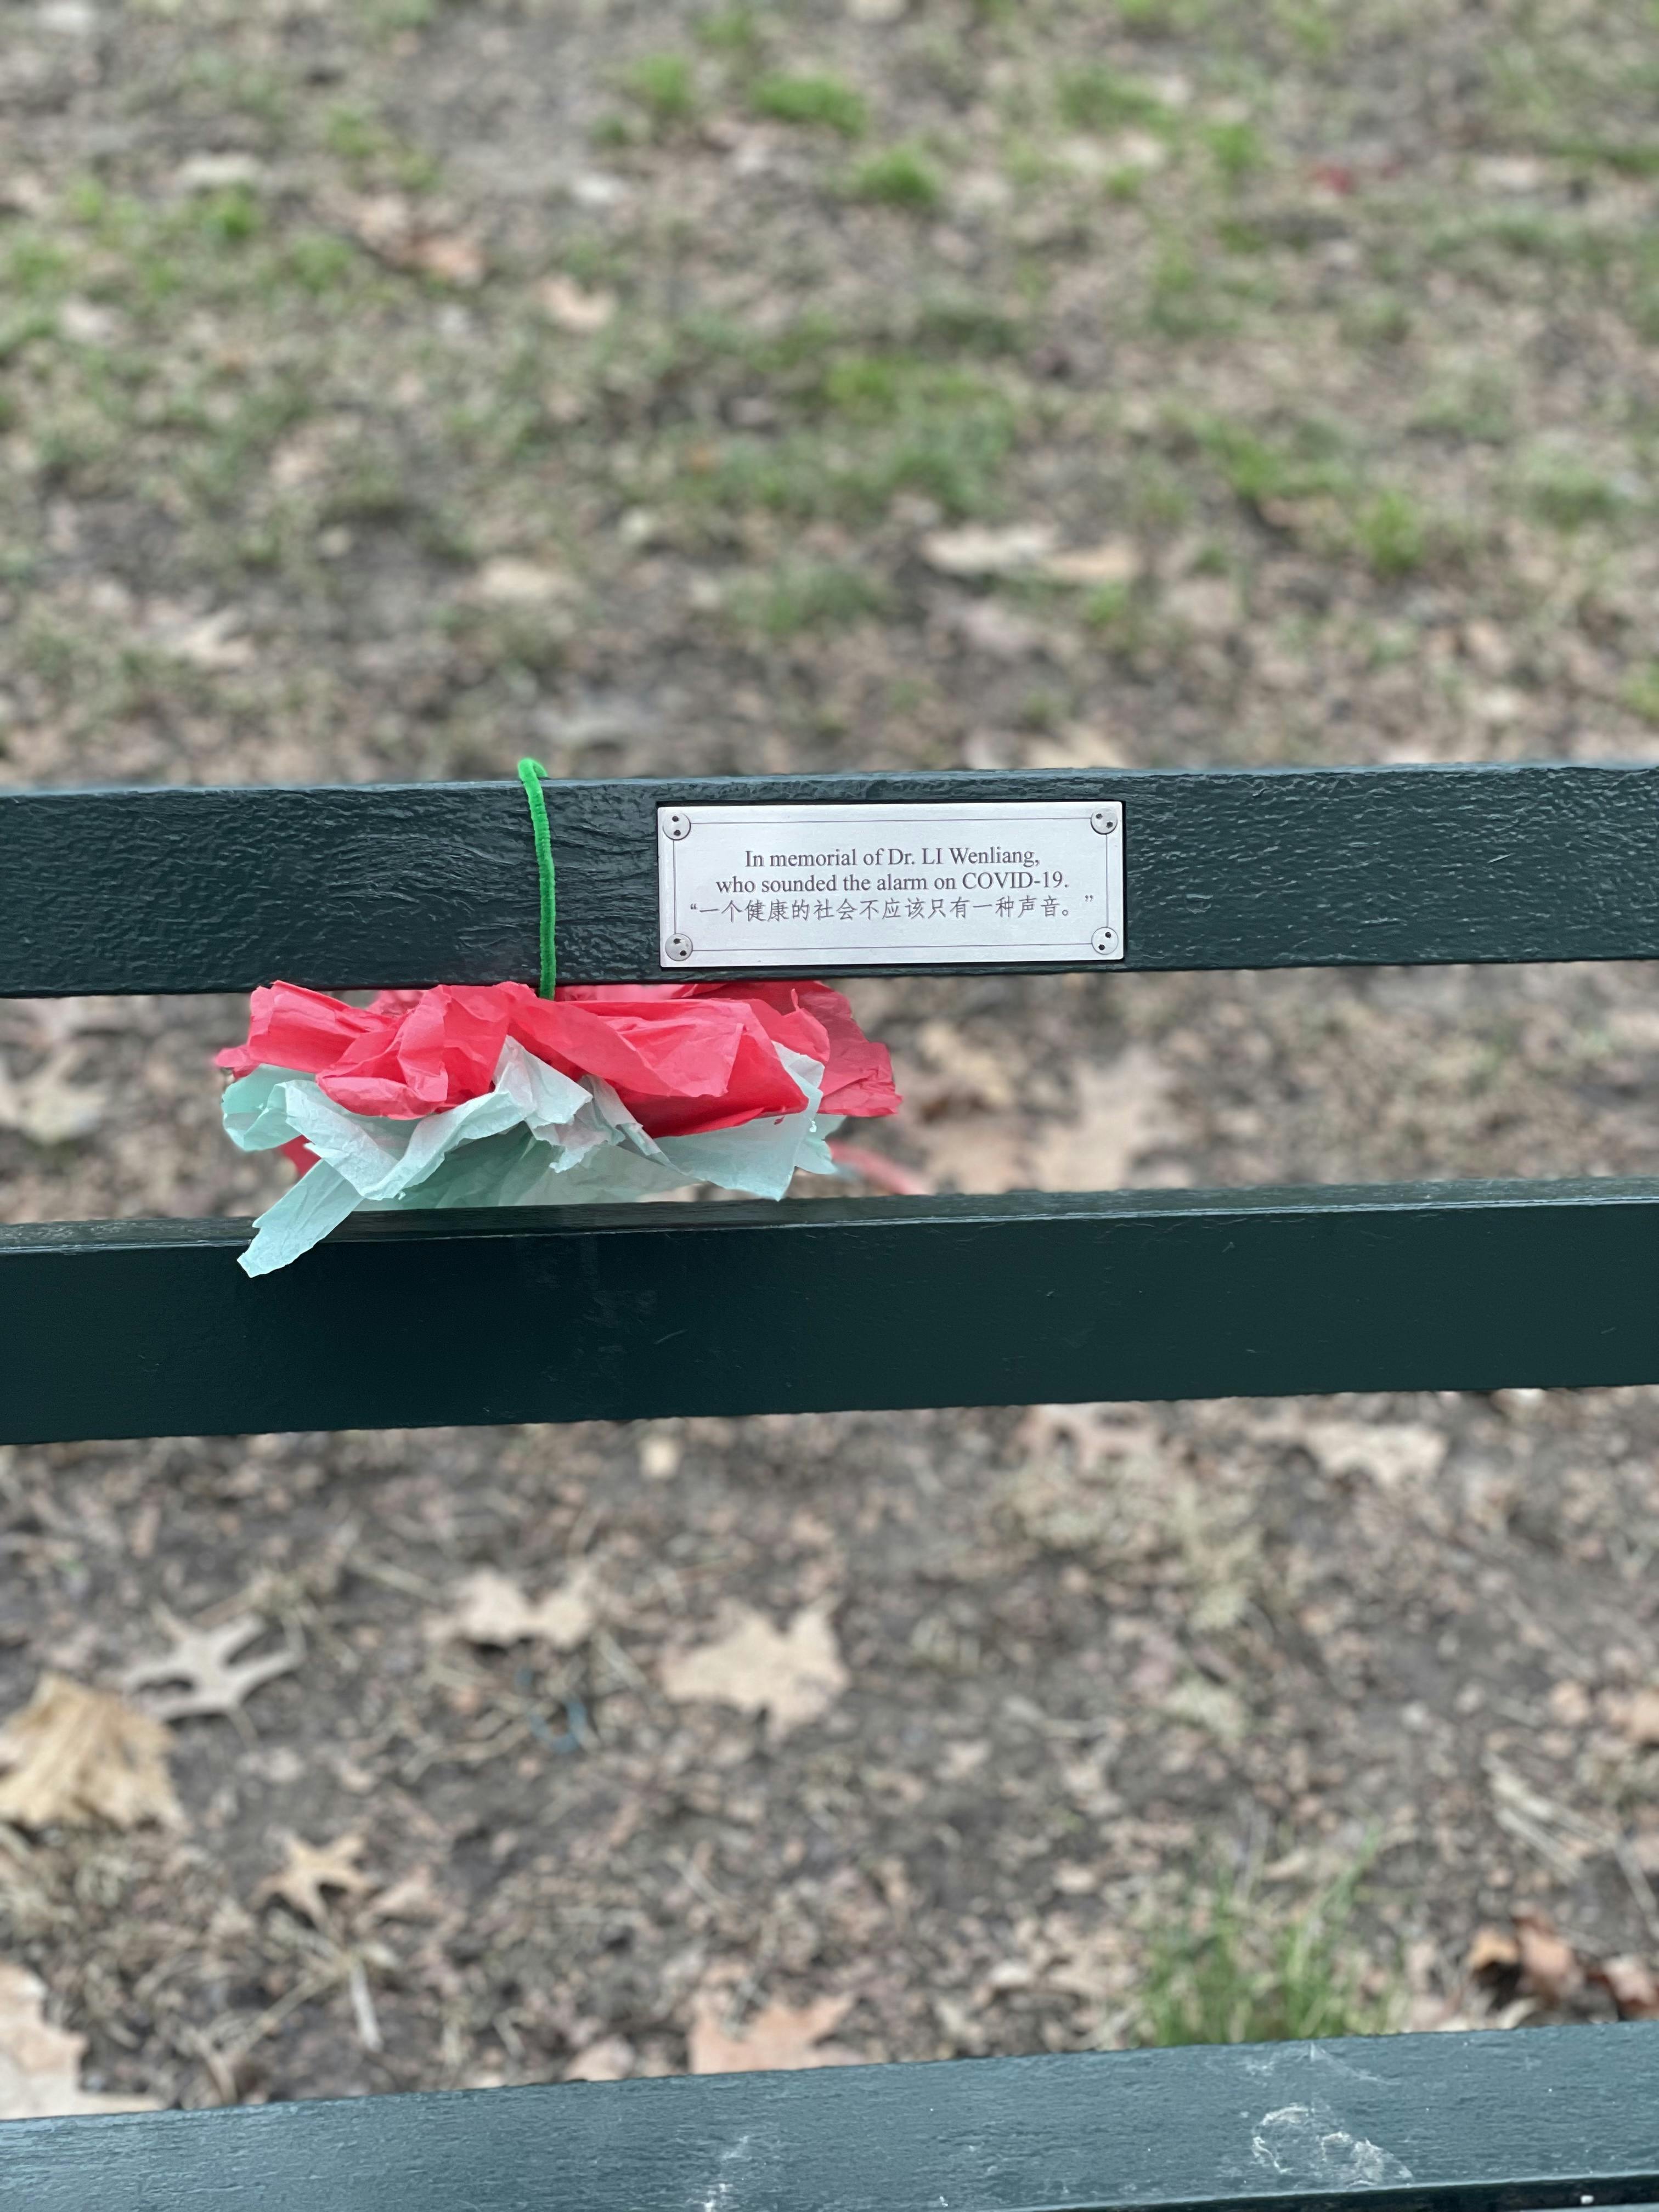 Powerful writing on a bench in a New York City park